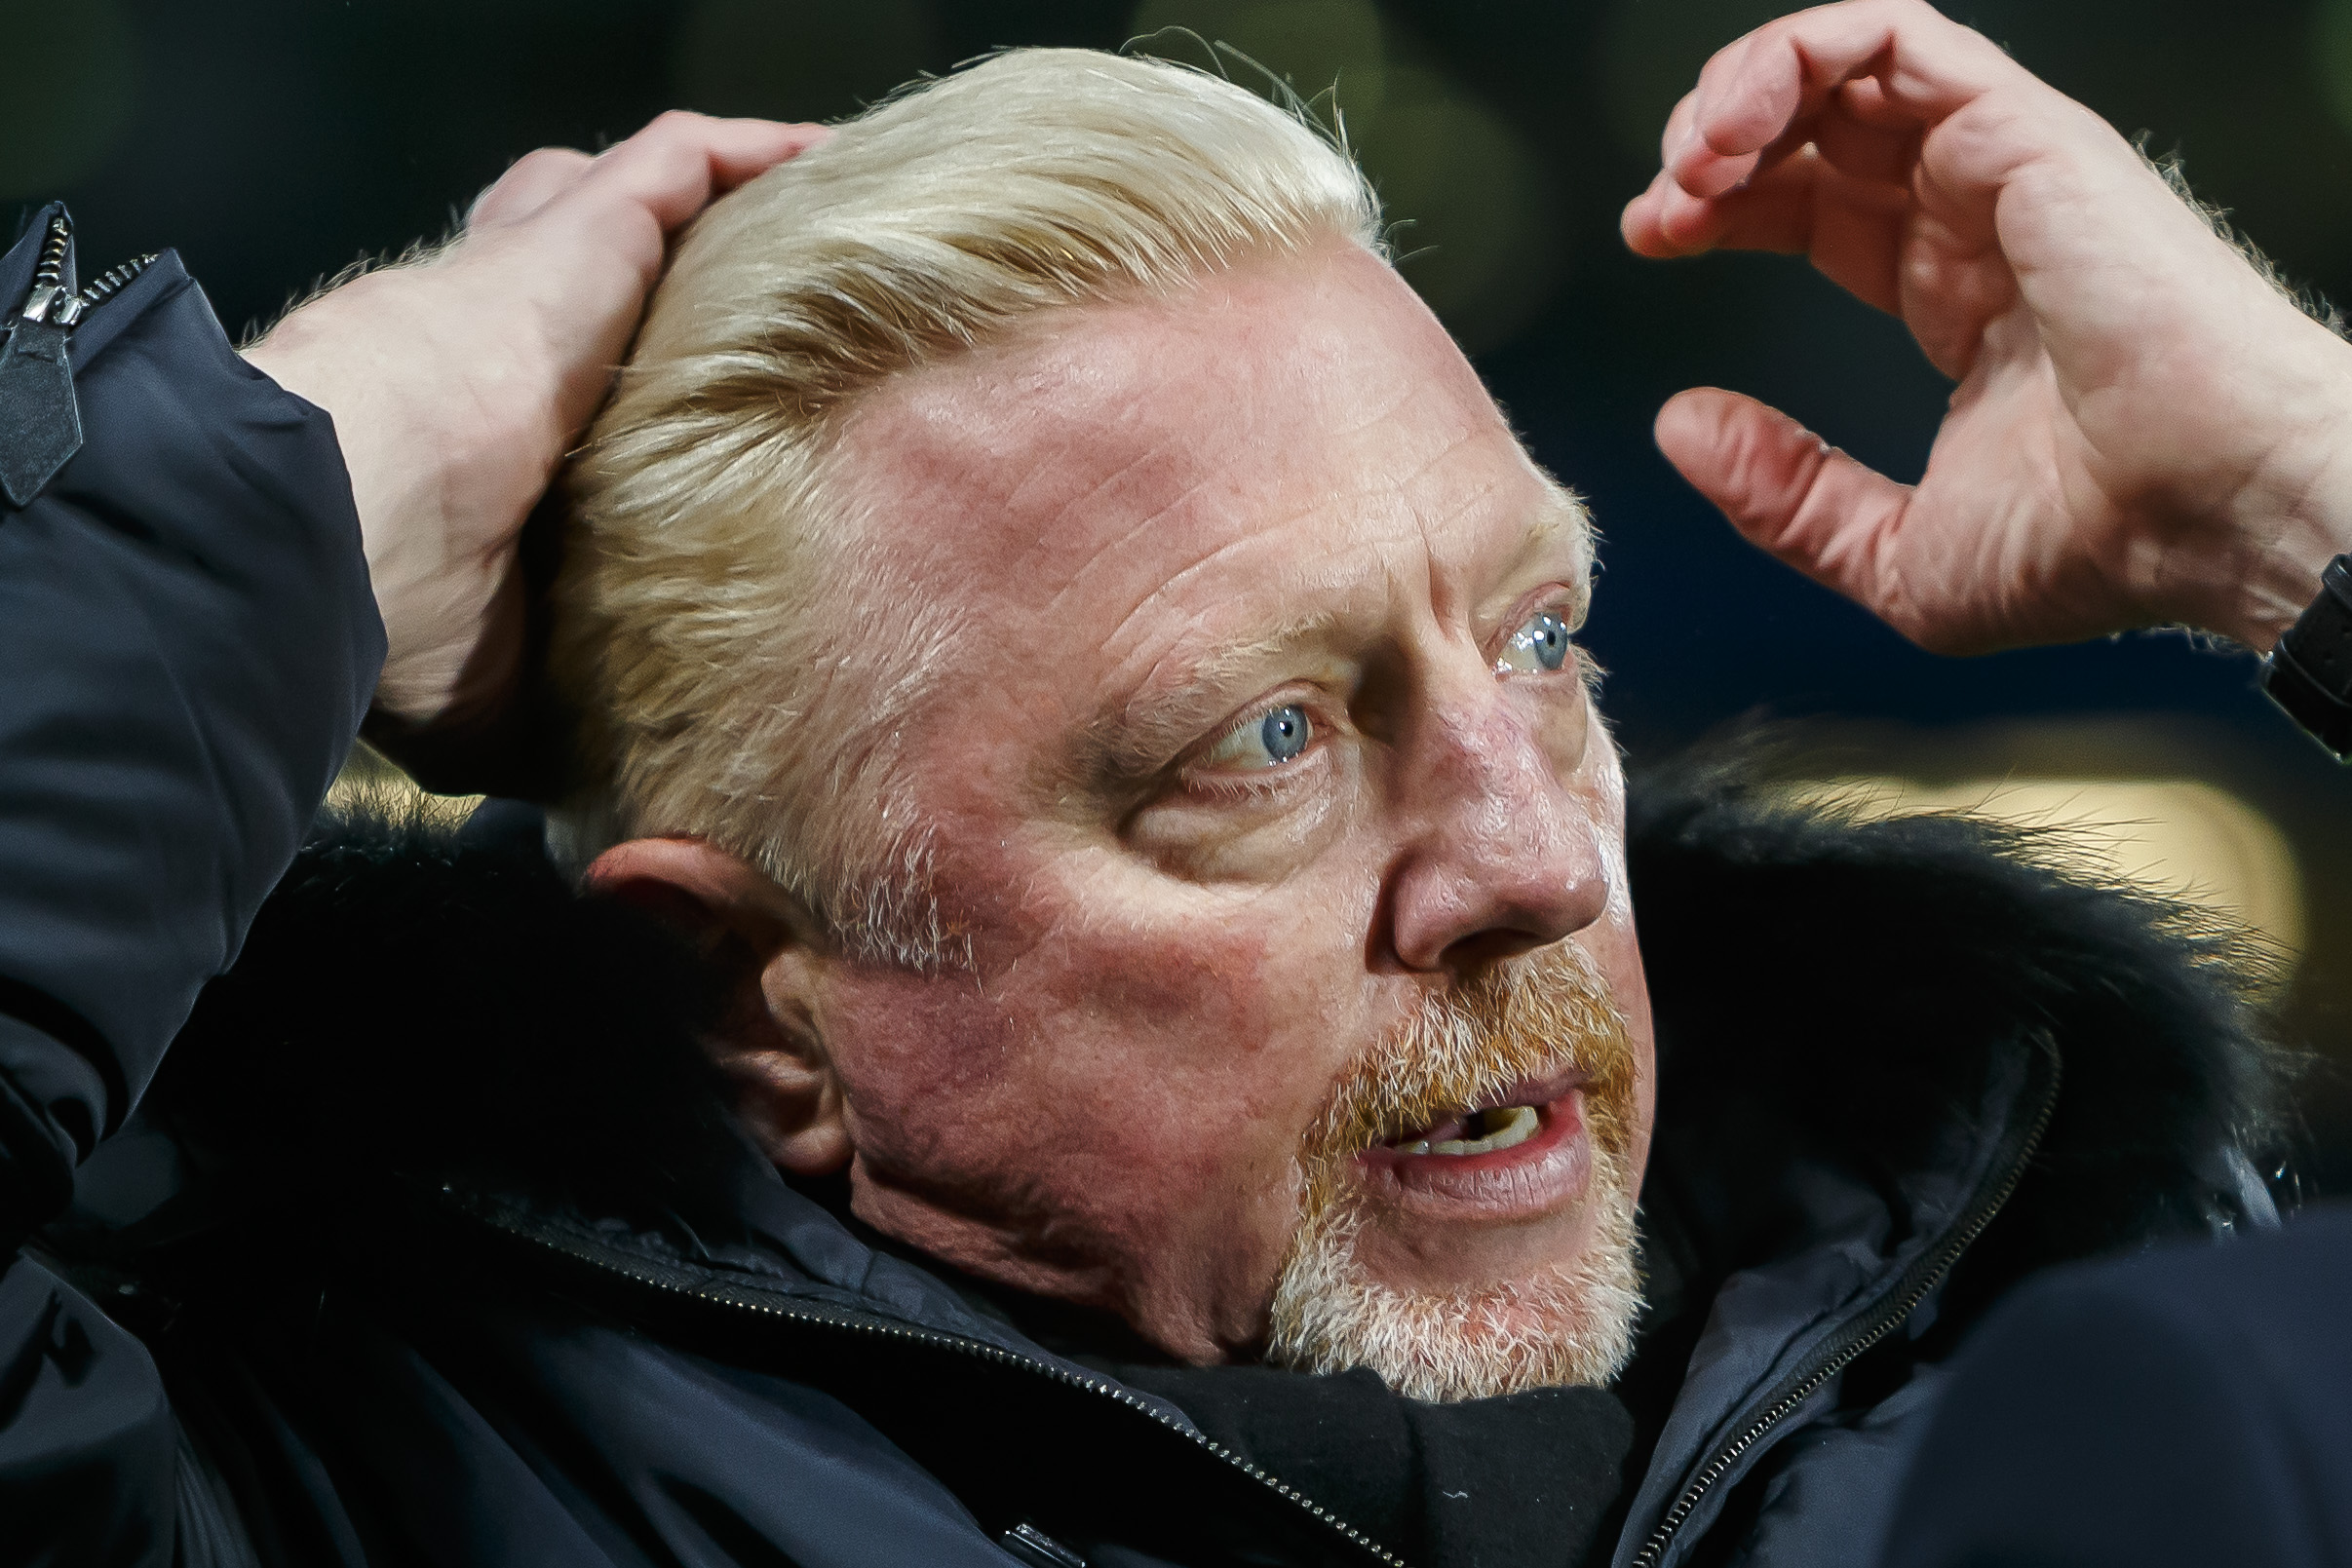 Boris Becker made enough money in tennis to last him a lifetime, but poor financial decisions in retirement left him bankrupt.